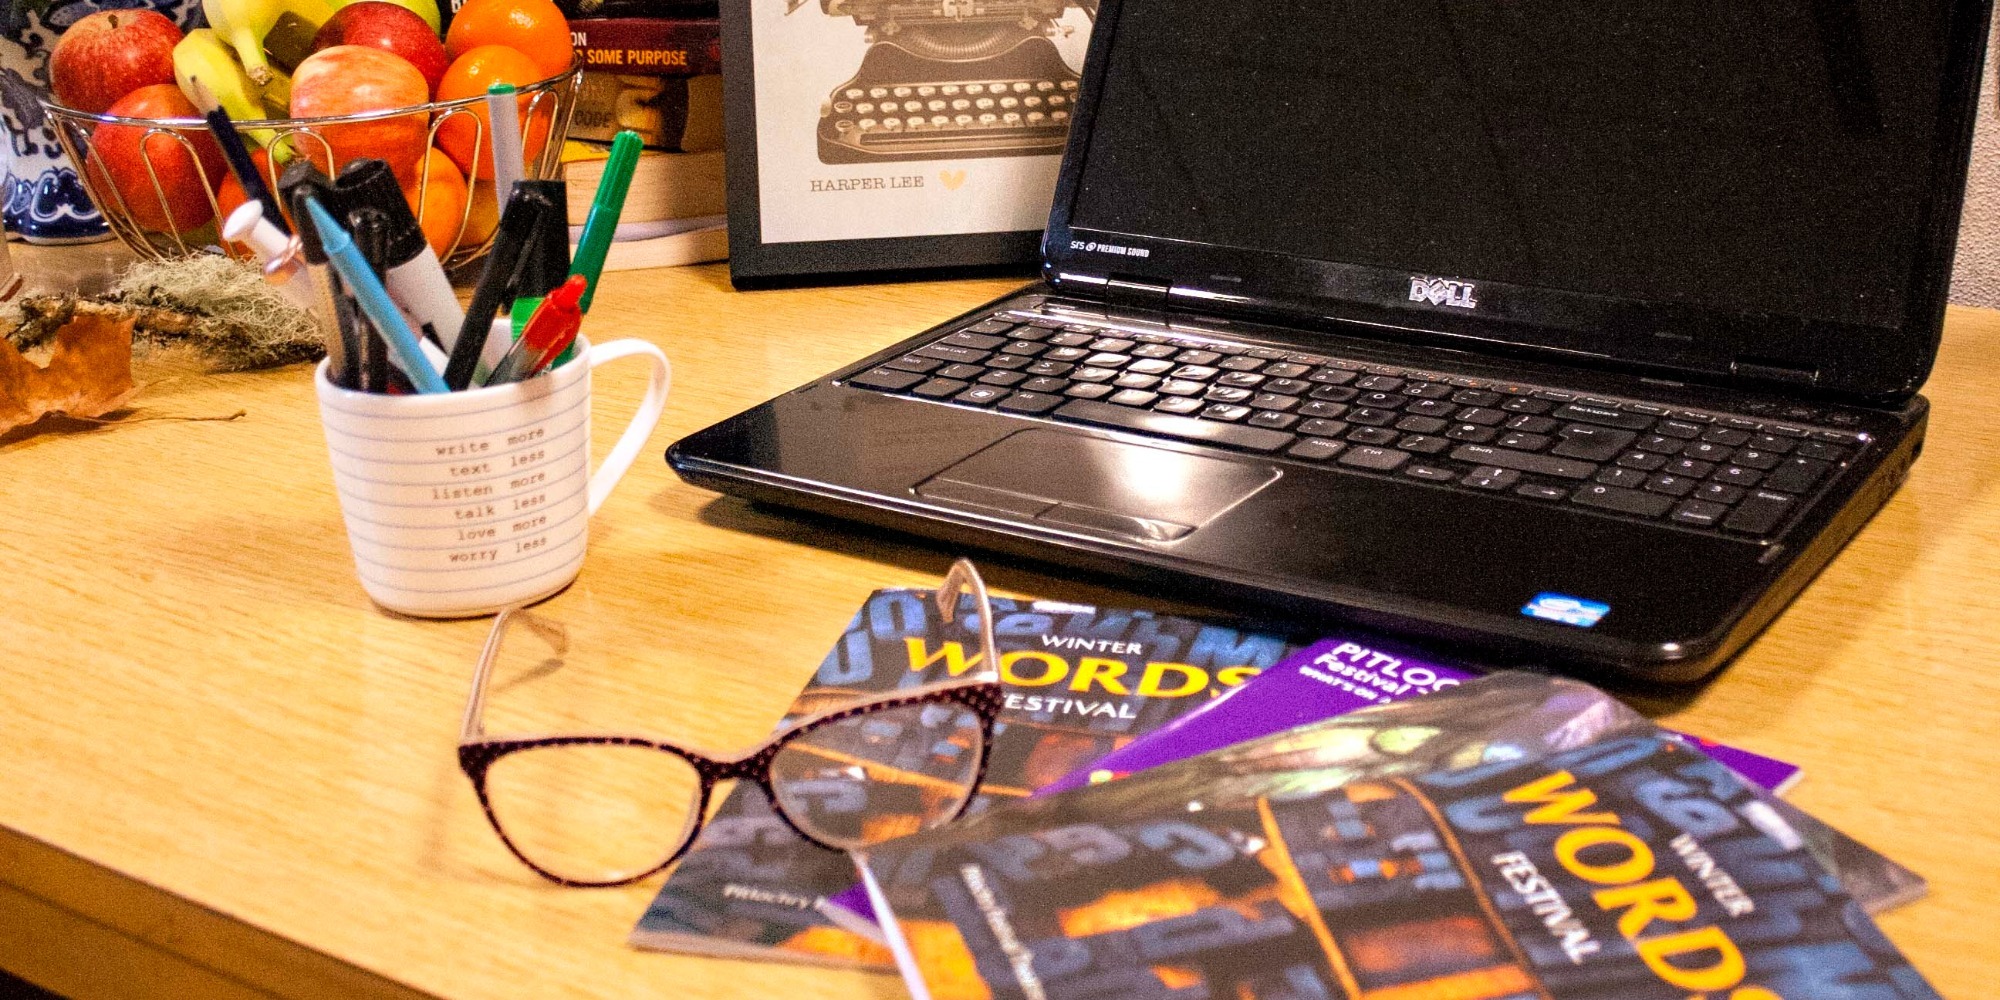 A laptop on a desk with flyers and a pair of glasses, on the left side of the desk is a cup full of pens and behind that is a fruit bowl